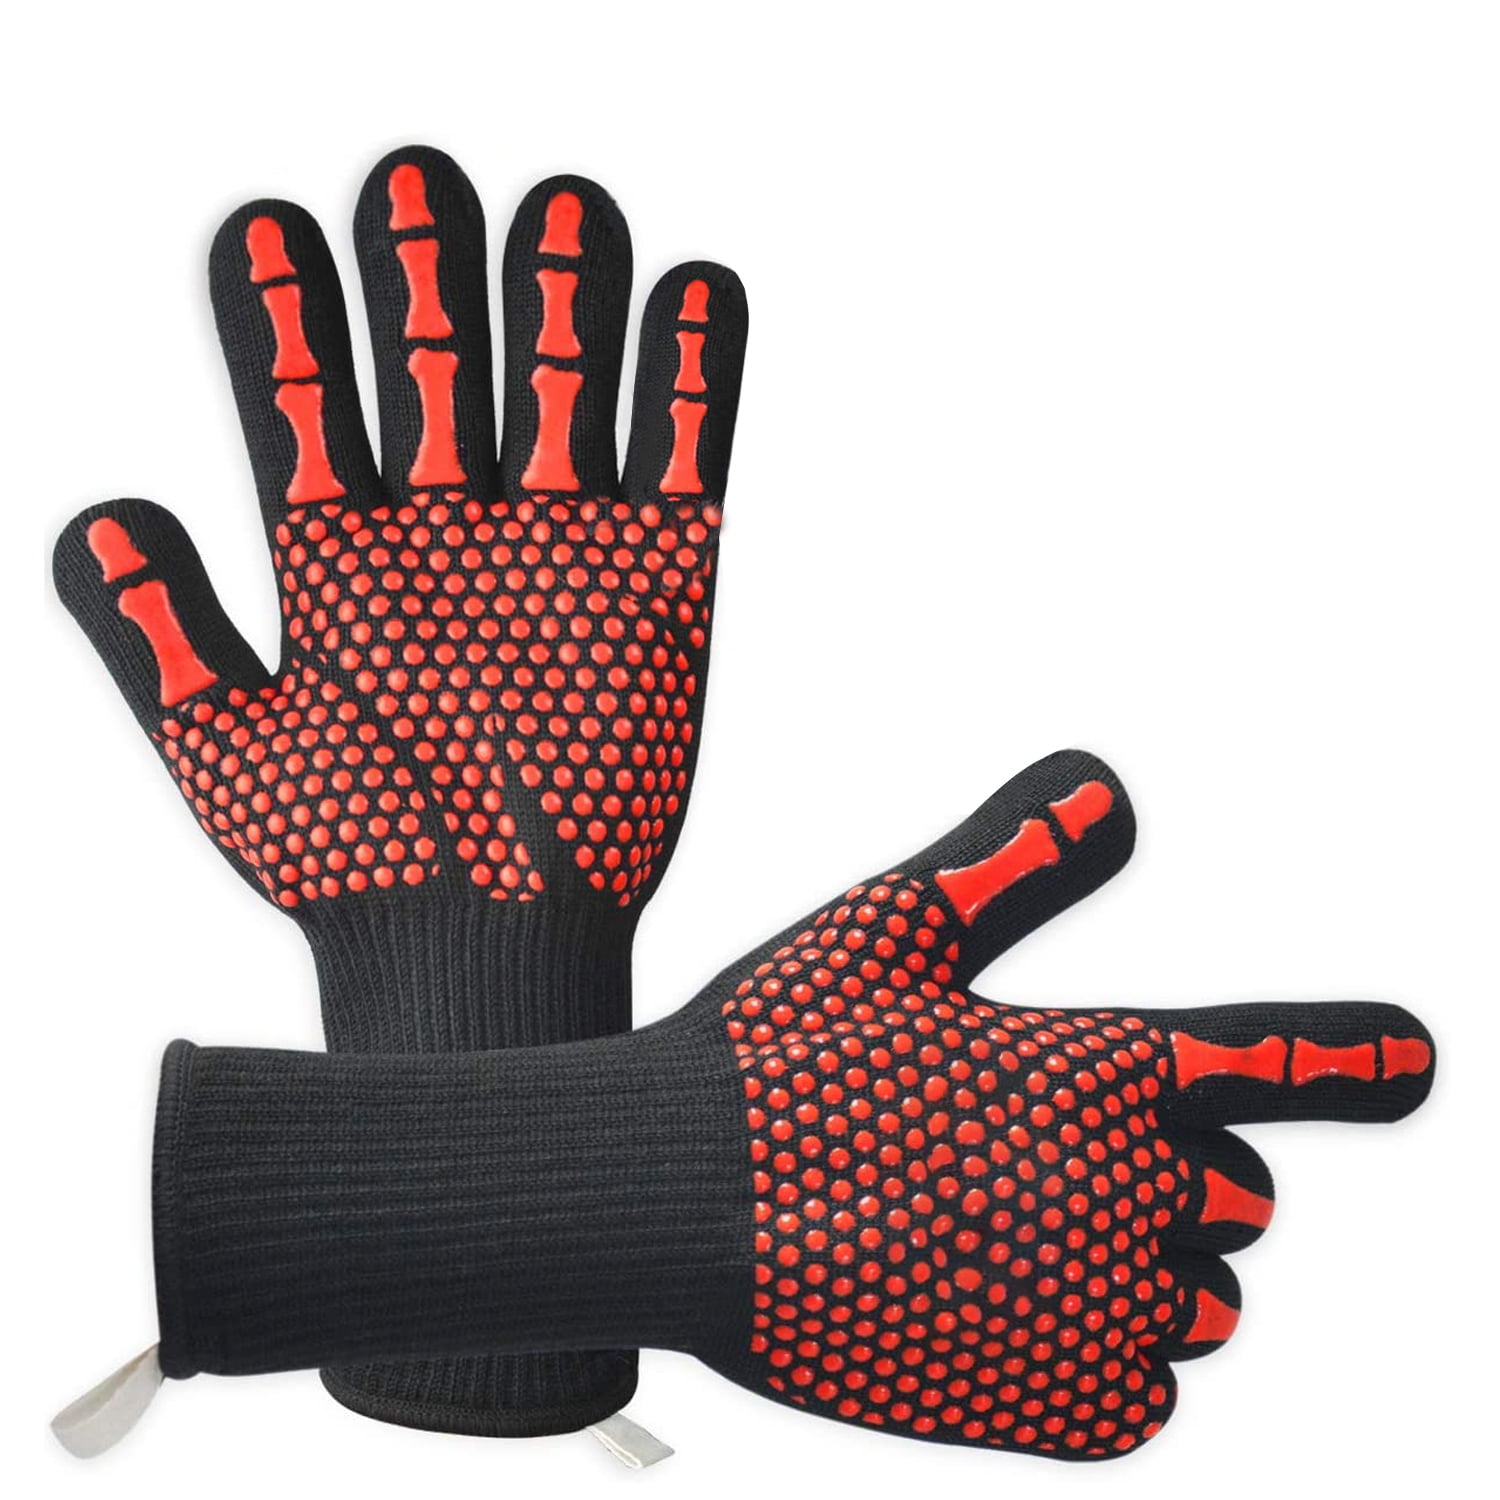 1/2Pcs BBQ Grilling Cooking Gloves Extreme Heat Resistant Baking Oven Welding